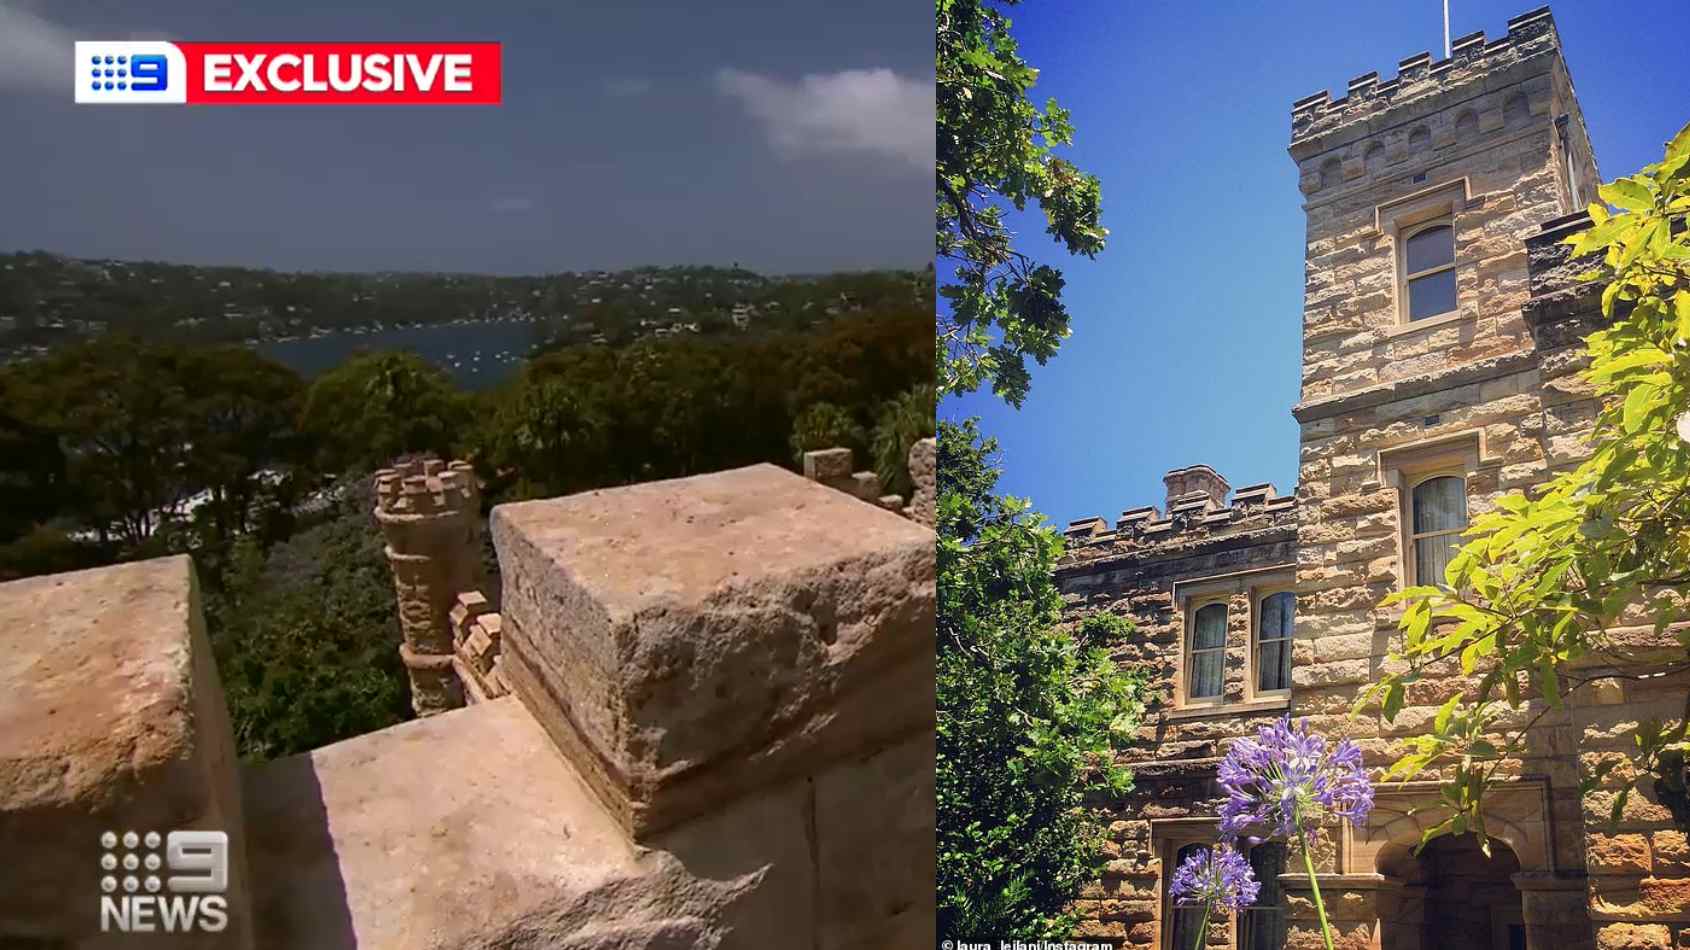 Ever wanted to own a real castle?